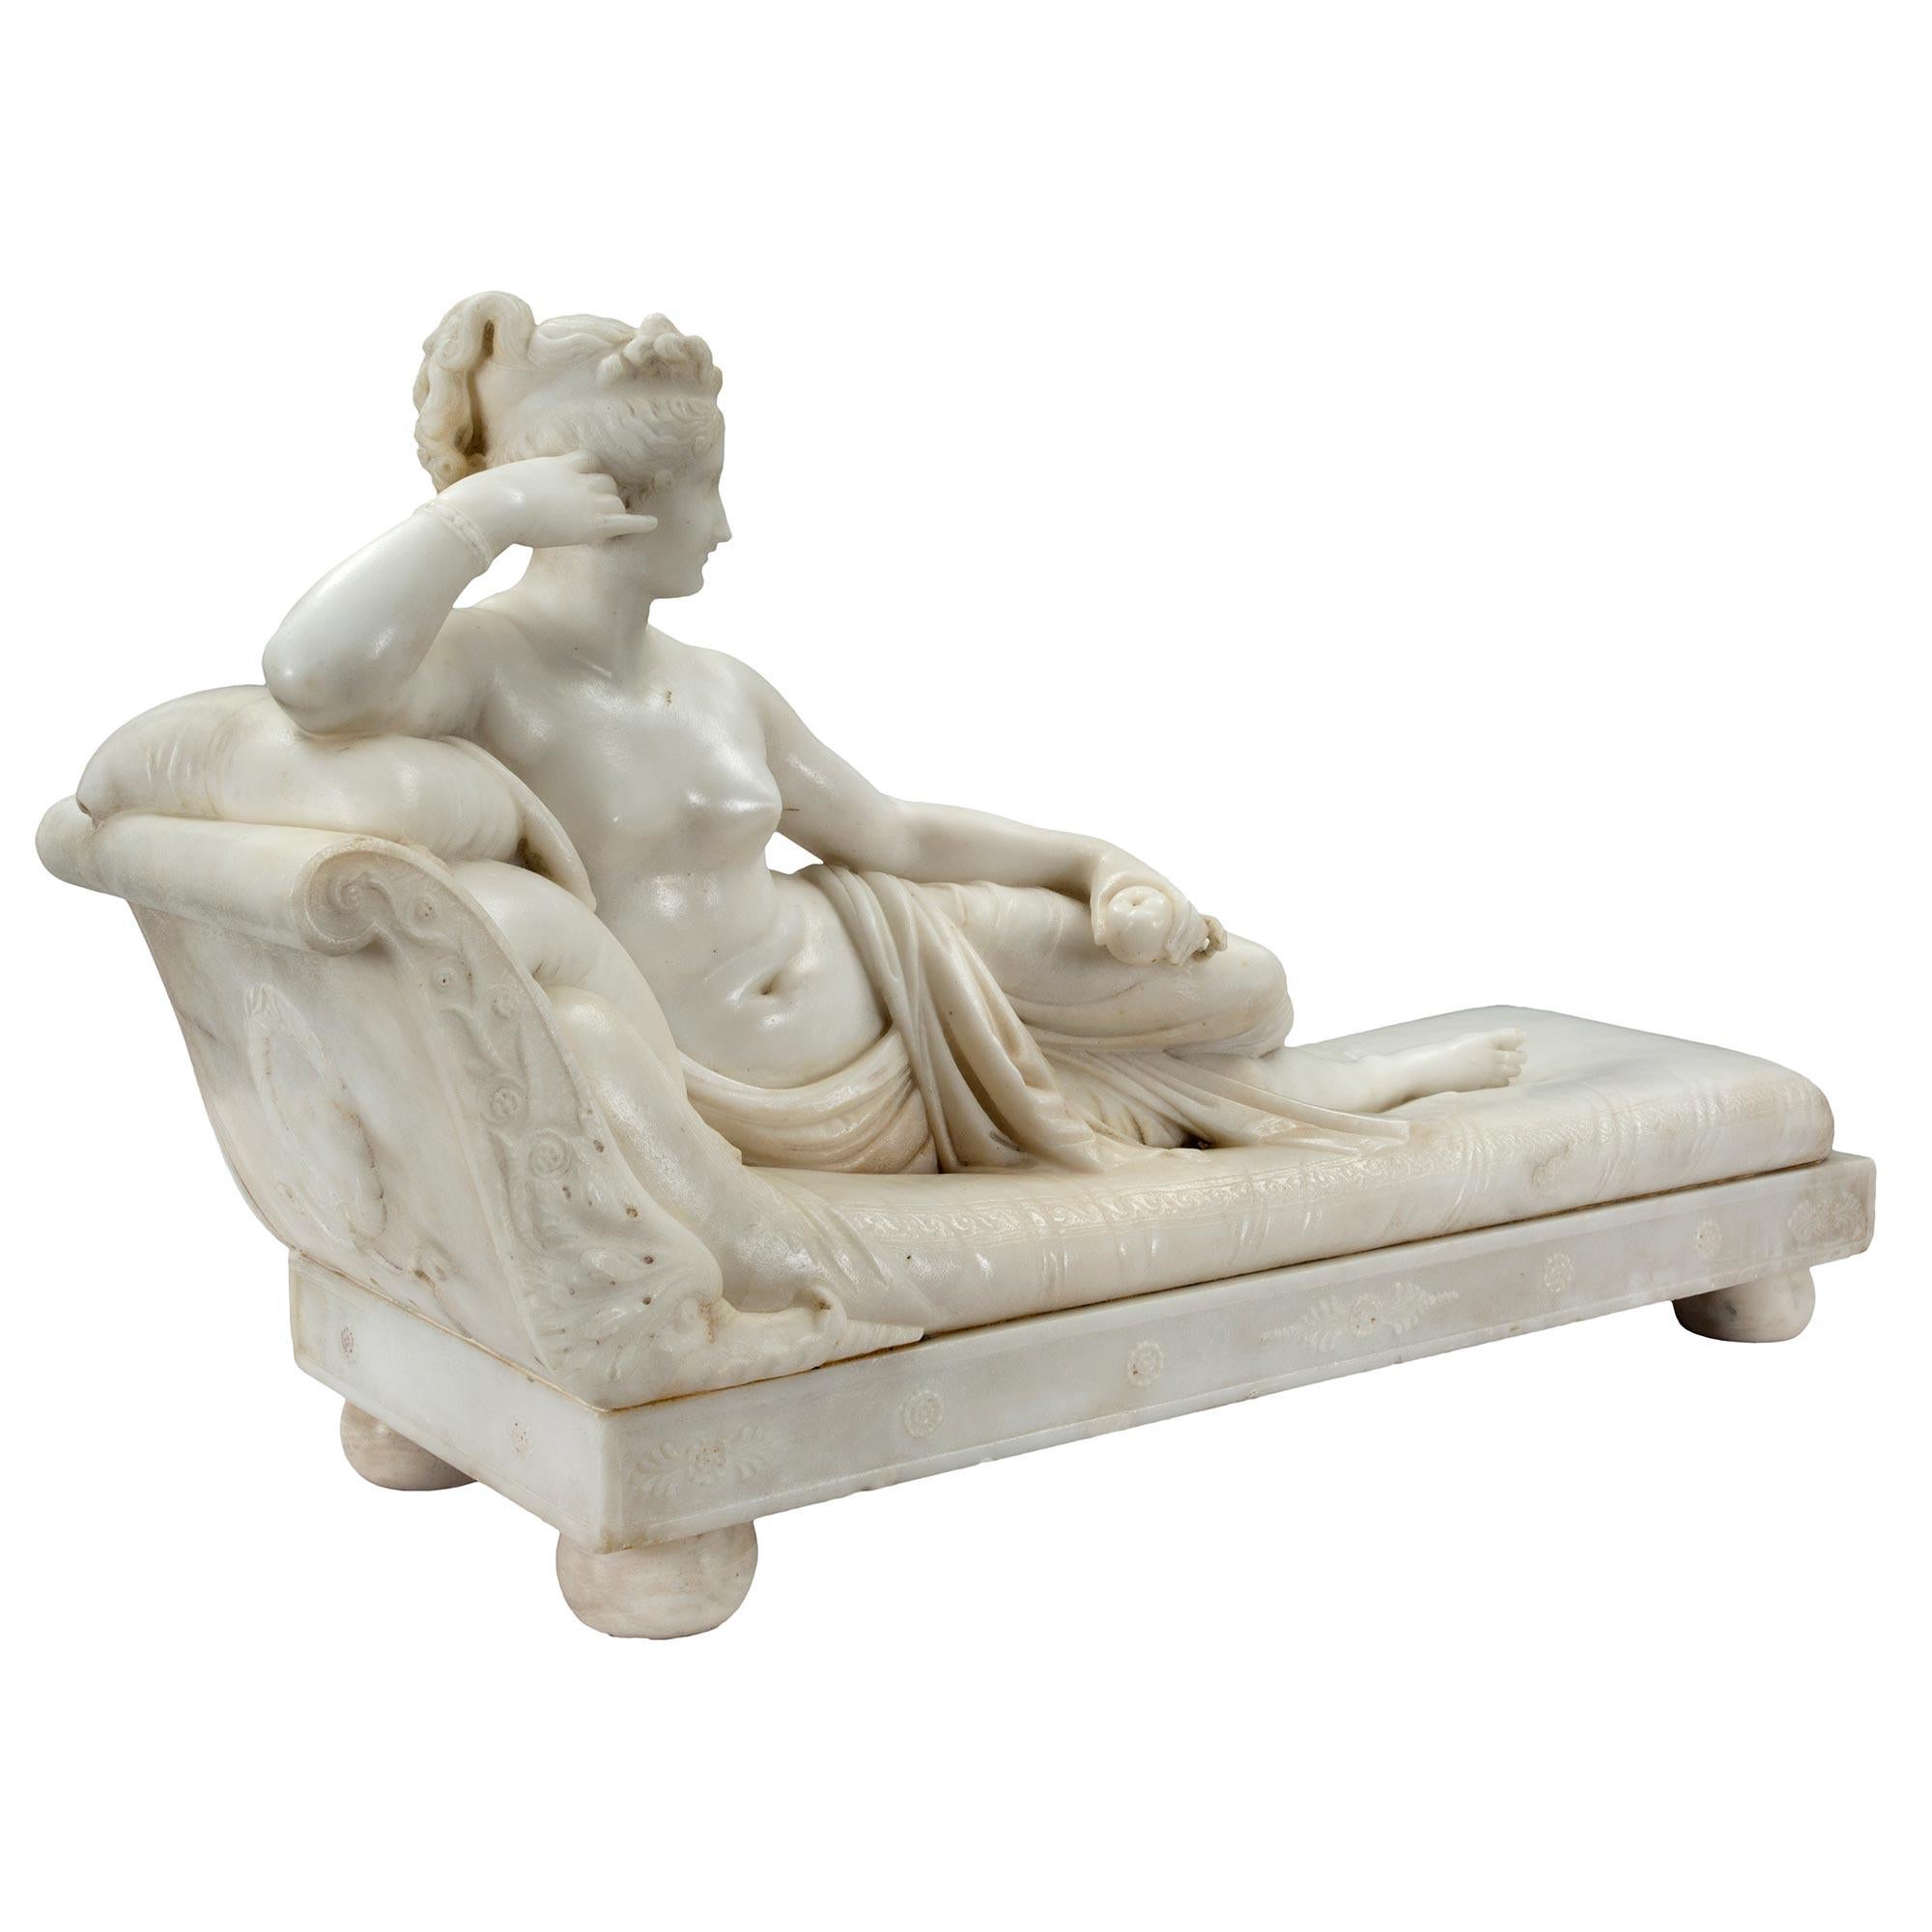 A spectacular Italian 19th century neo-classical white carrara marble sculpture of Paulina Bonaparte signed by Carlo Fossi. Paulina was the sister to Emperor Napoleon and is sculpted laying on her bed. Modeled after the original by Antonio Canova,